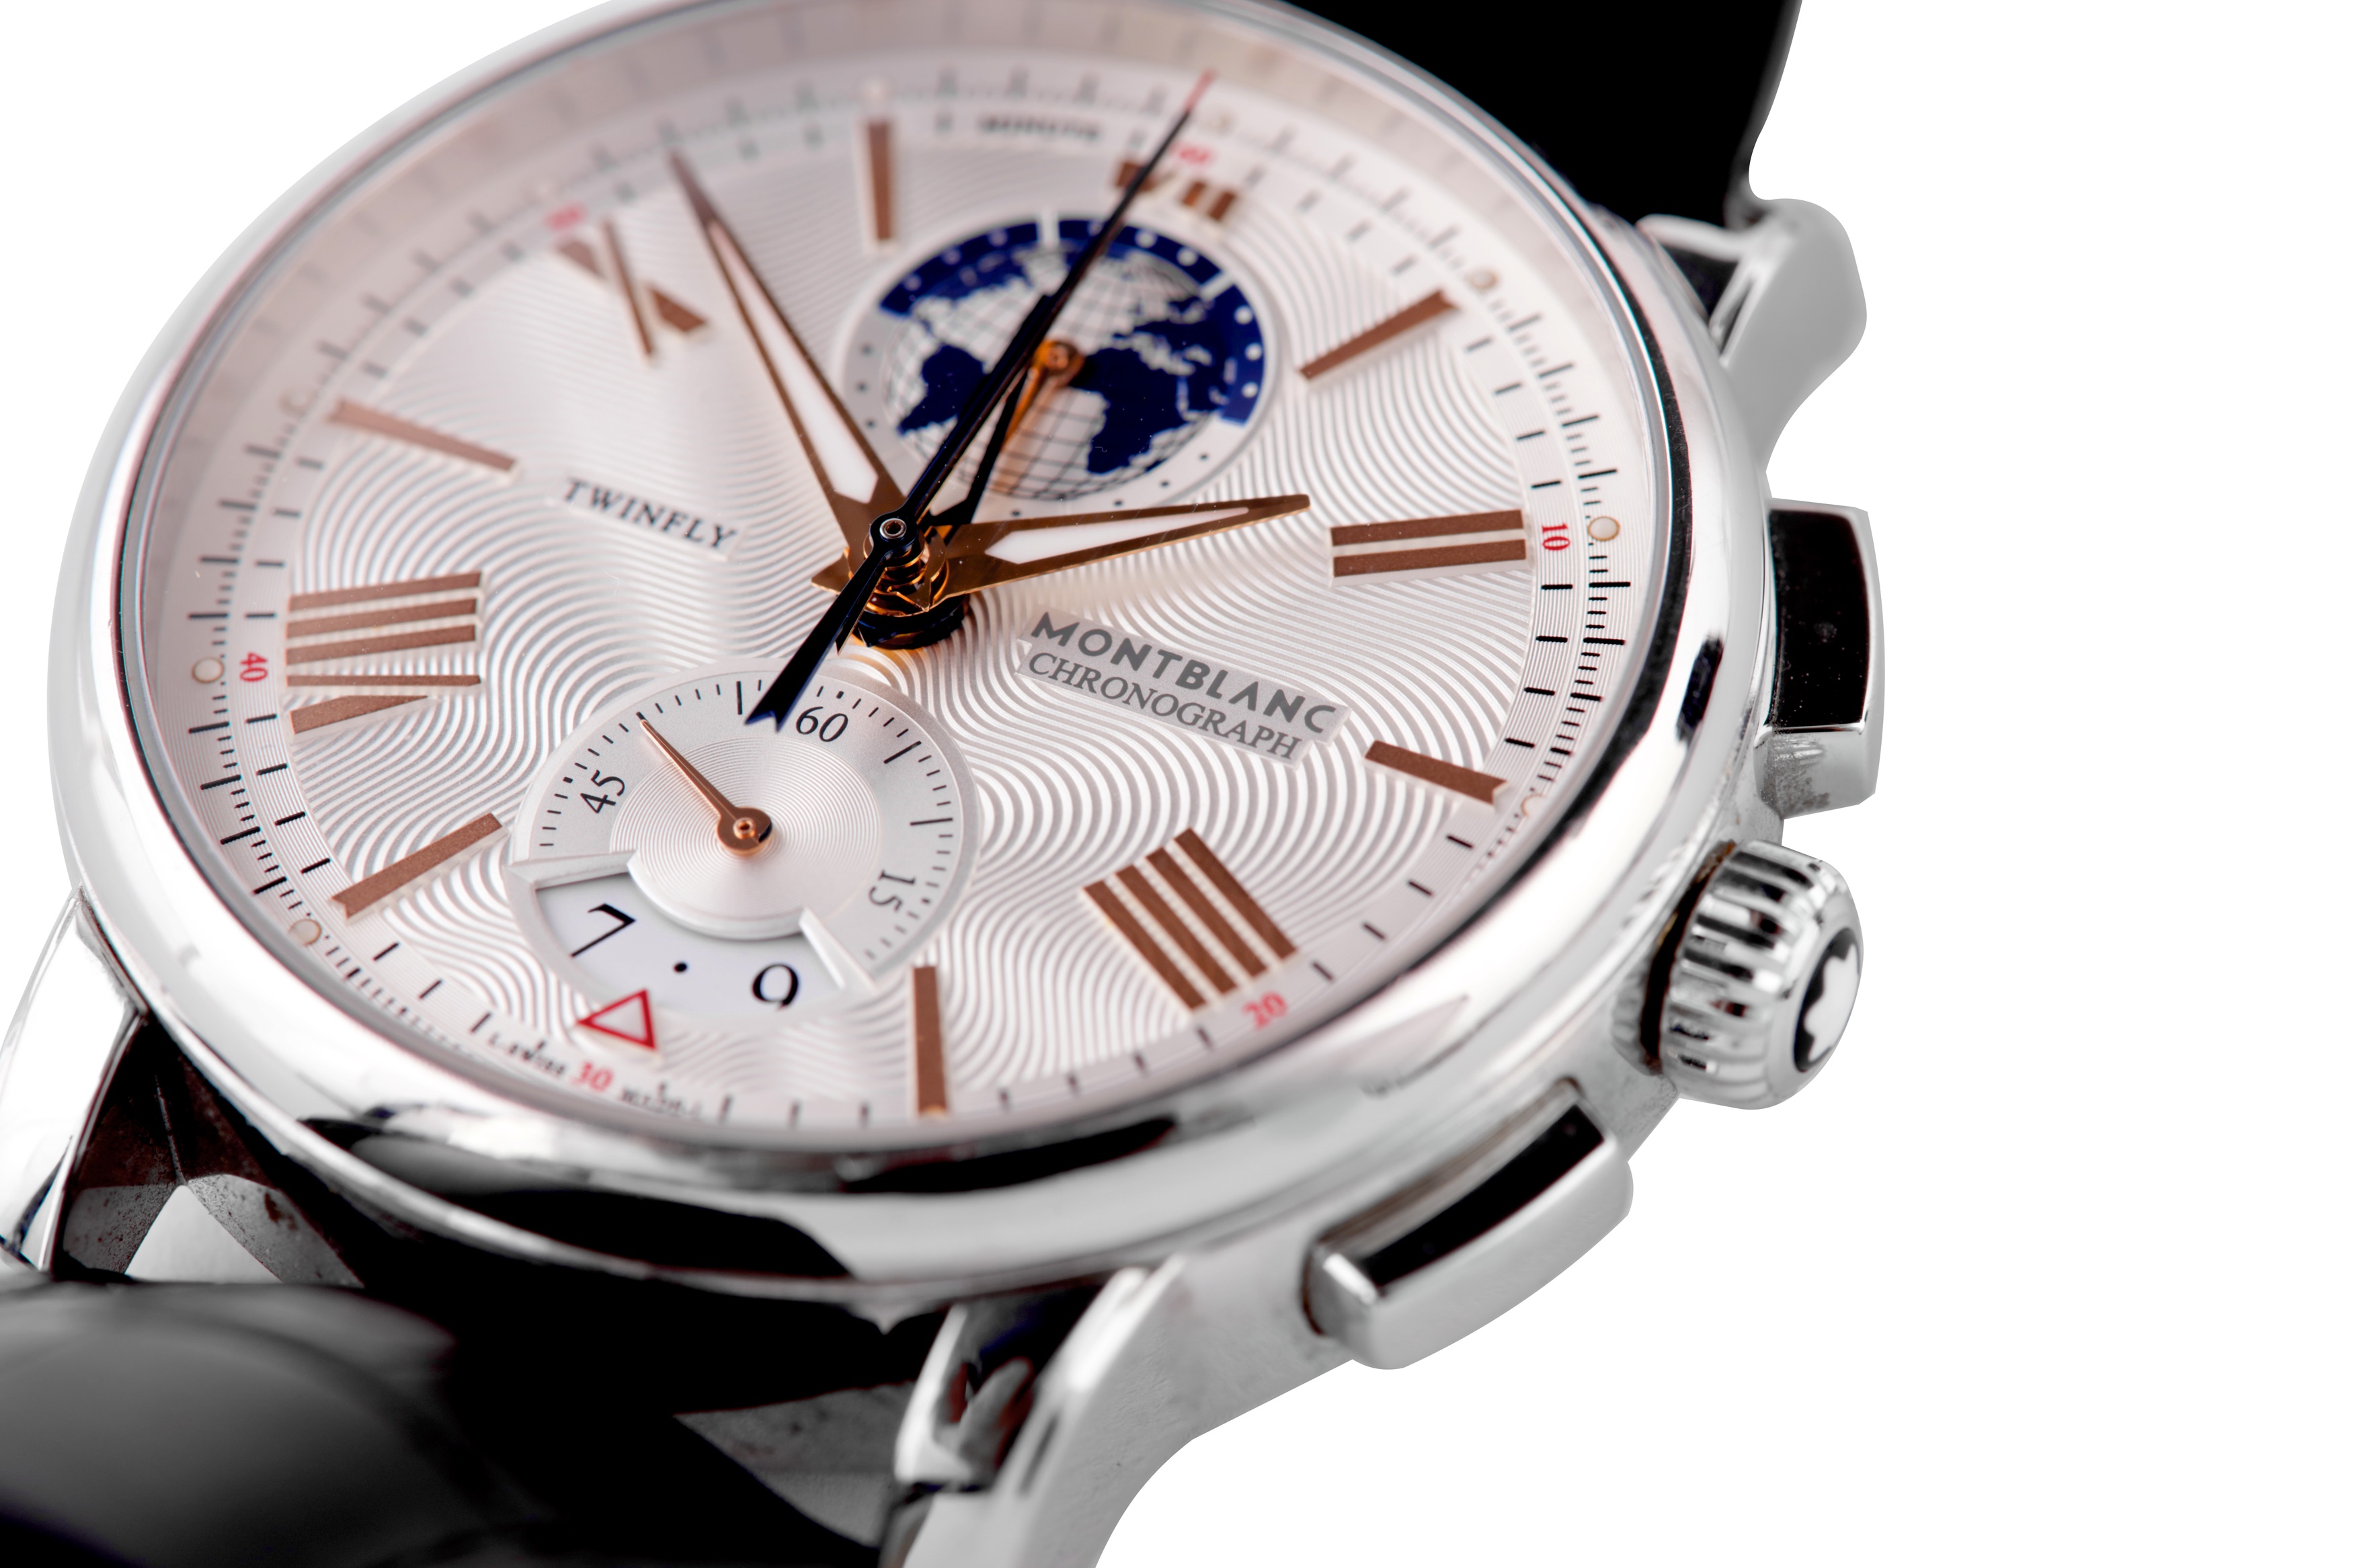 MONTBLANC. 4810 TWINFLY CHRONOGRAPH 110 YEARS EDITION - Image 7 of 8